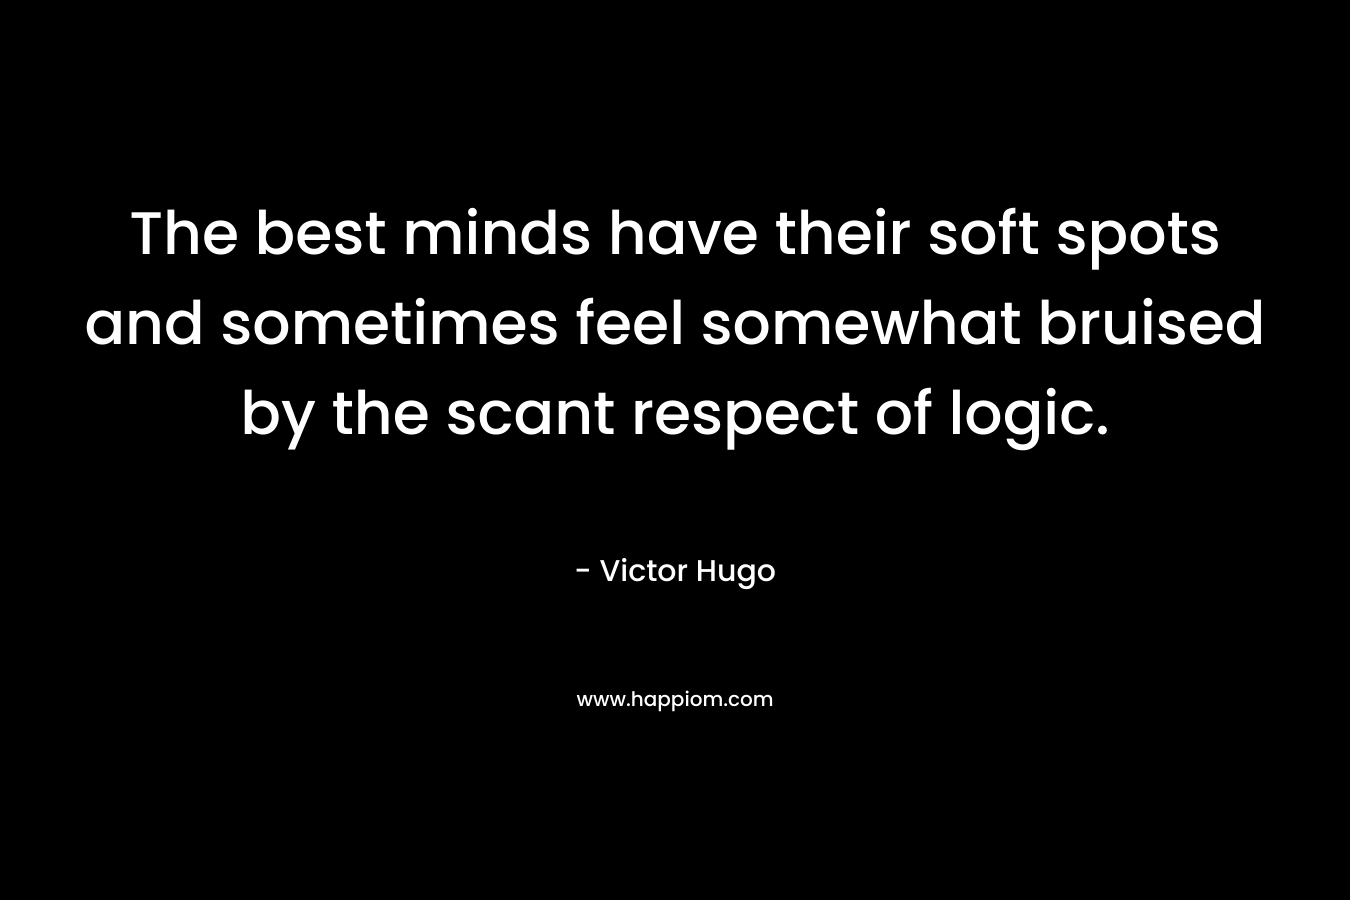 The best minds have their soft spots and sometimes feel somewhat bruised by the scant respect of logic. – Victor Hugo